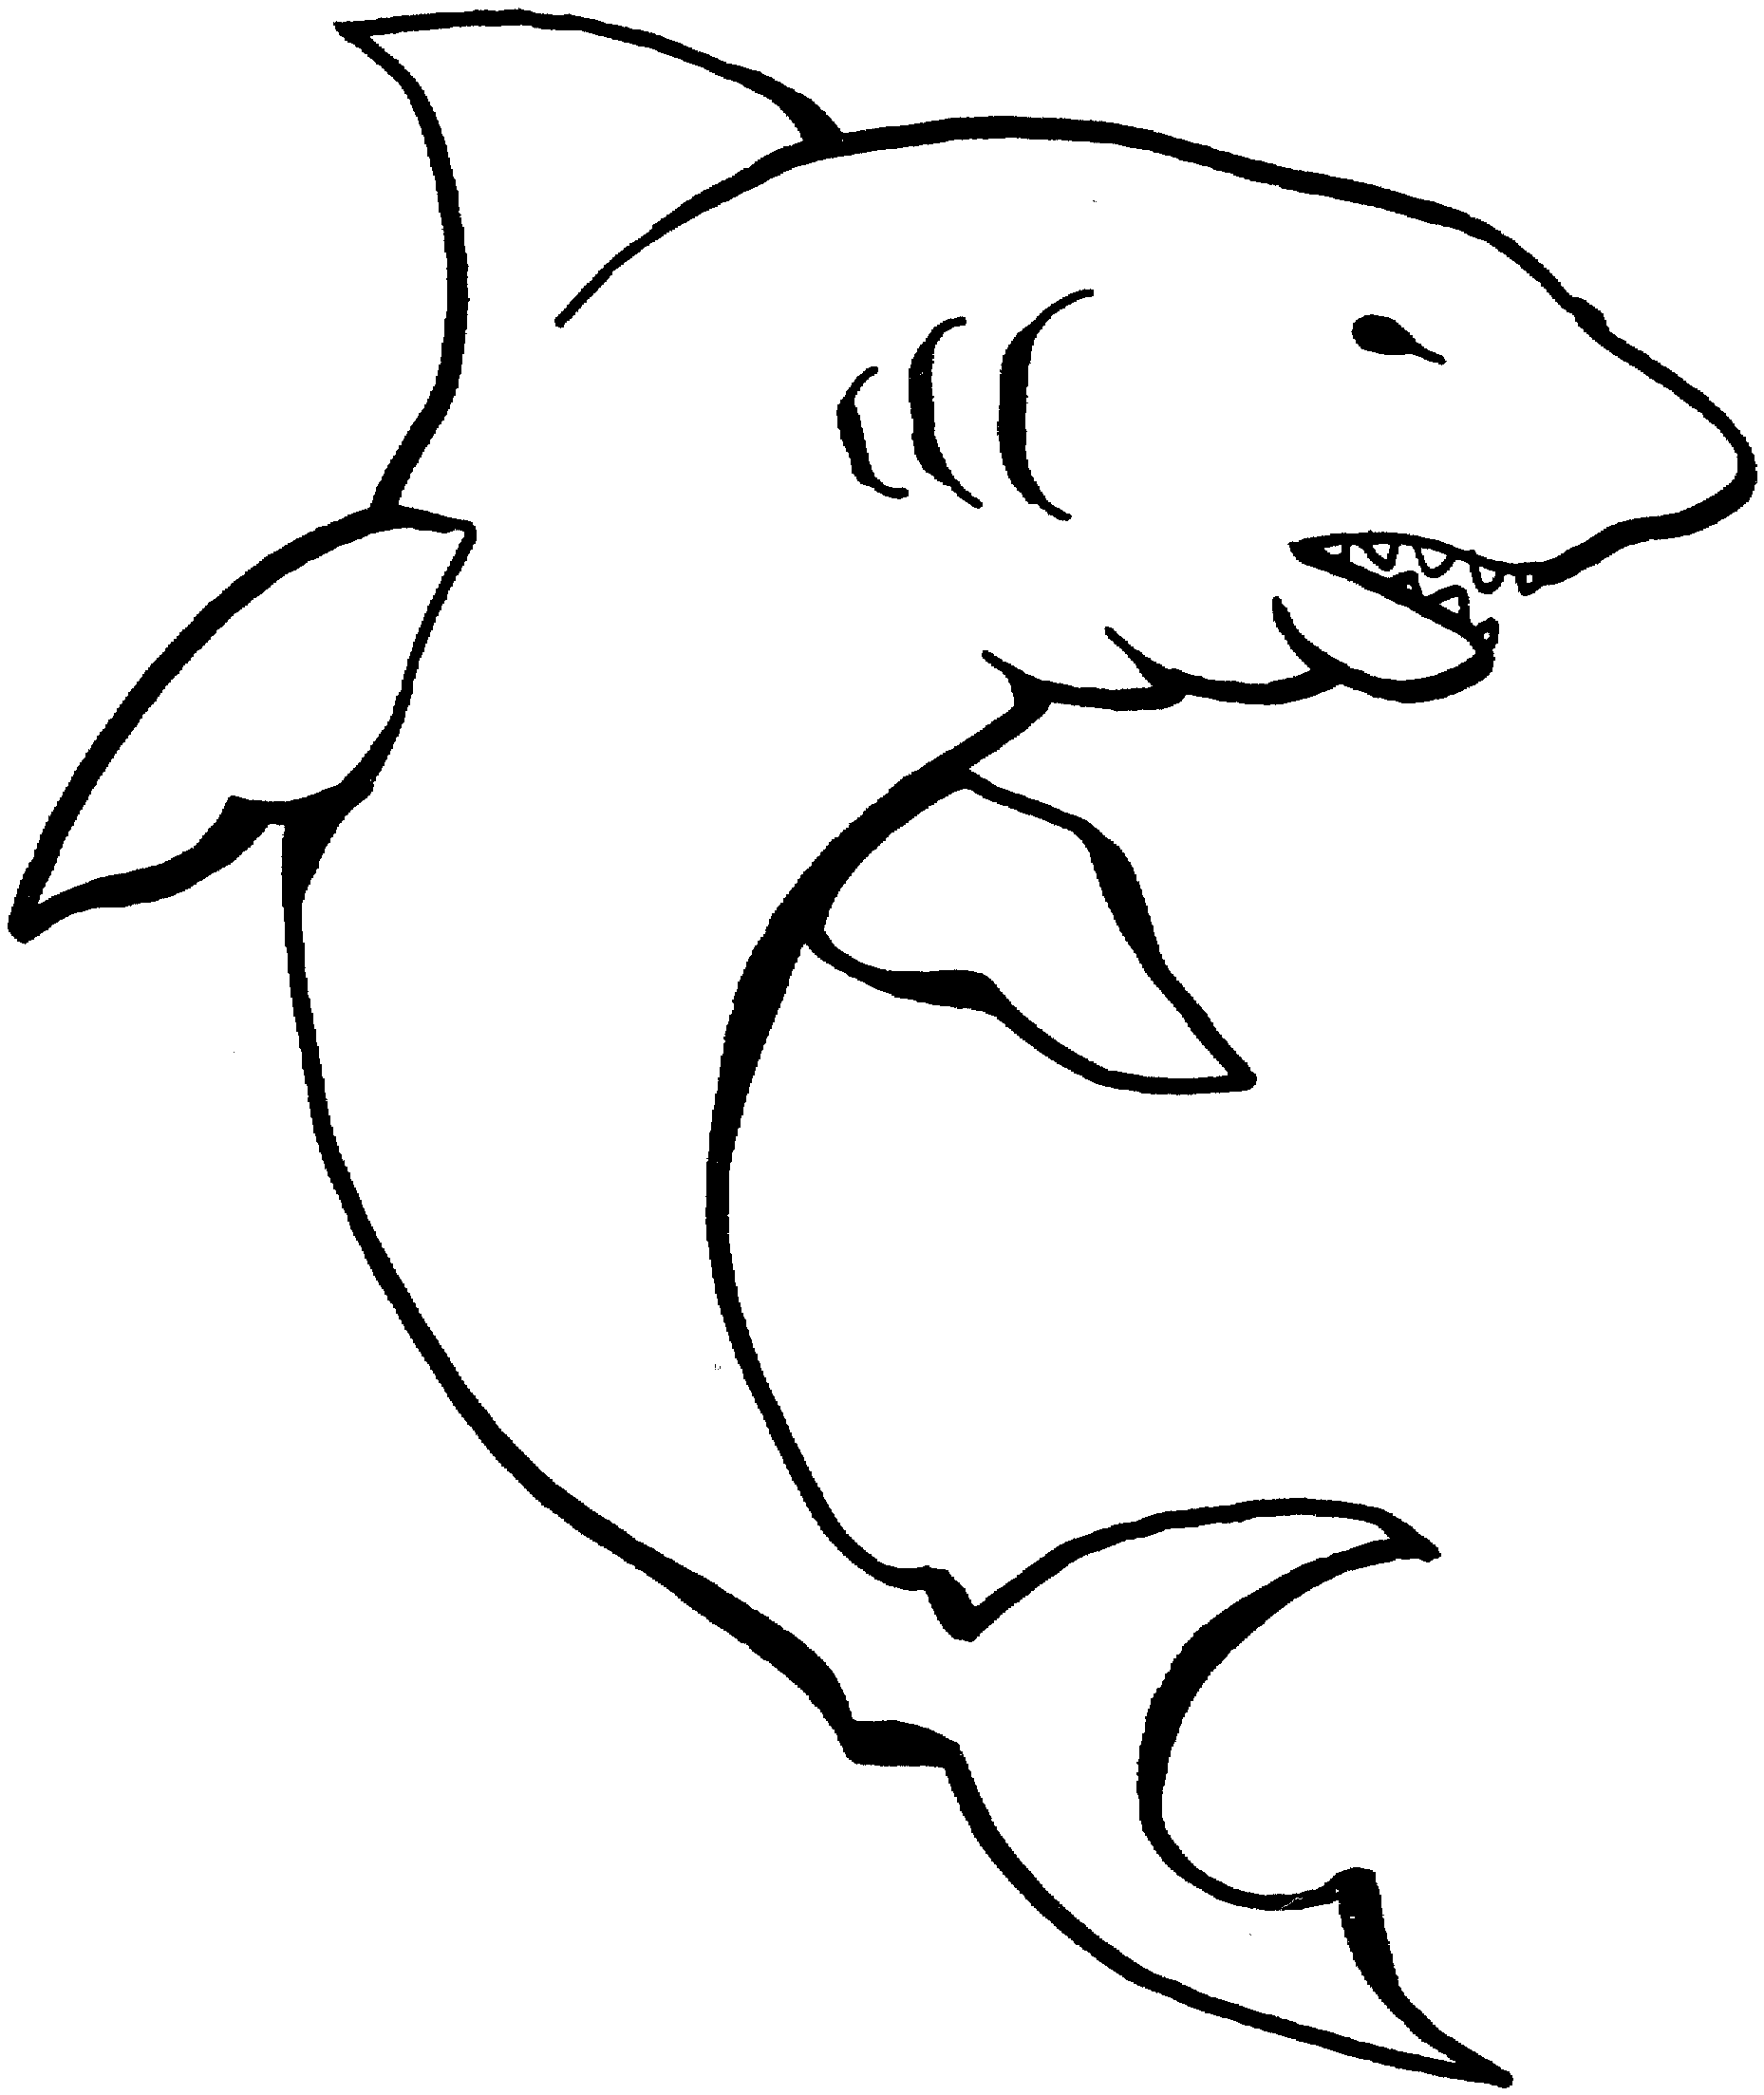 Shark Graphic | Free Download Clip Art | Free Clip Art | on ...